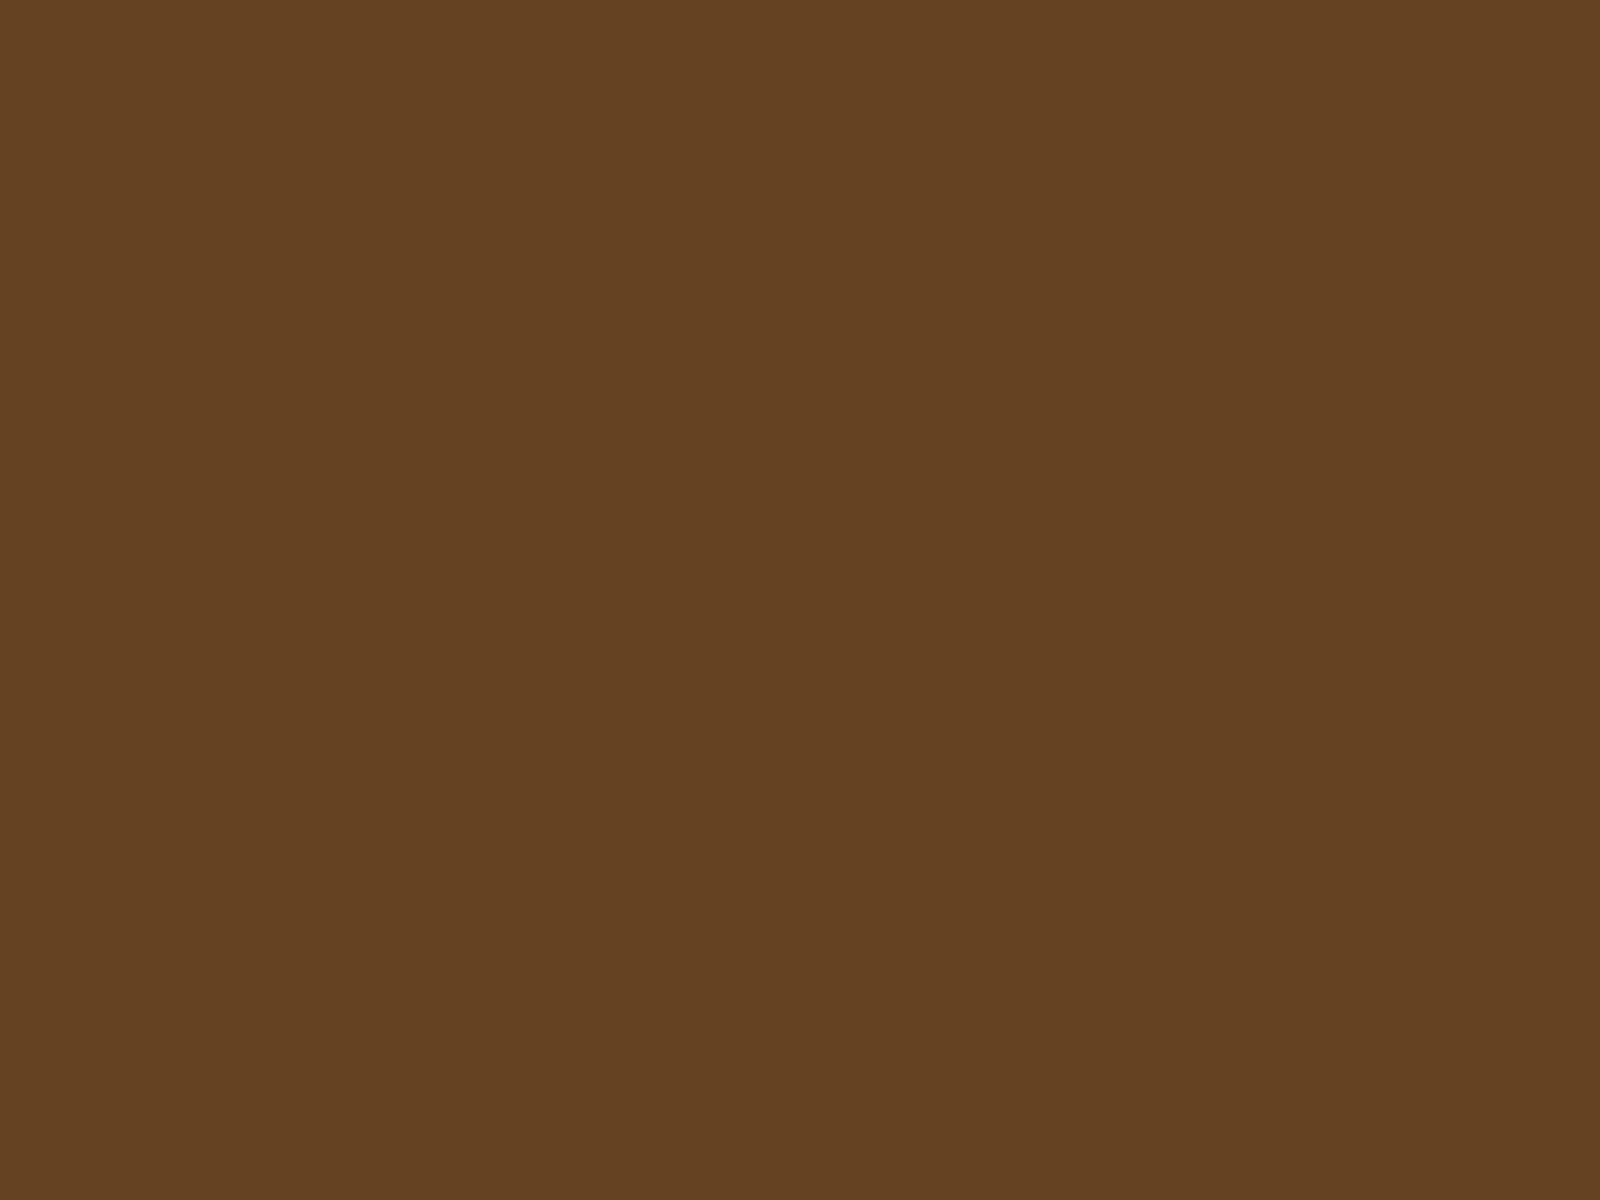 Brown Background Images  Free iPhone  Zoom HD Wallpapers  Vectors   rawpixel